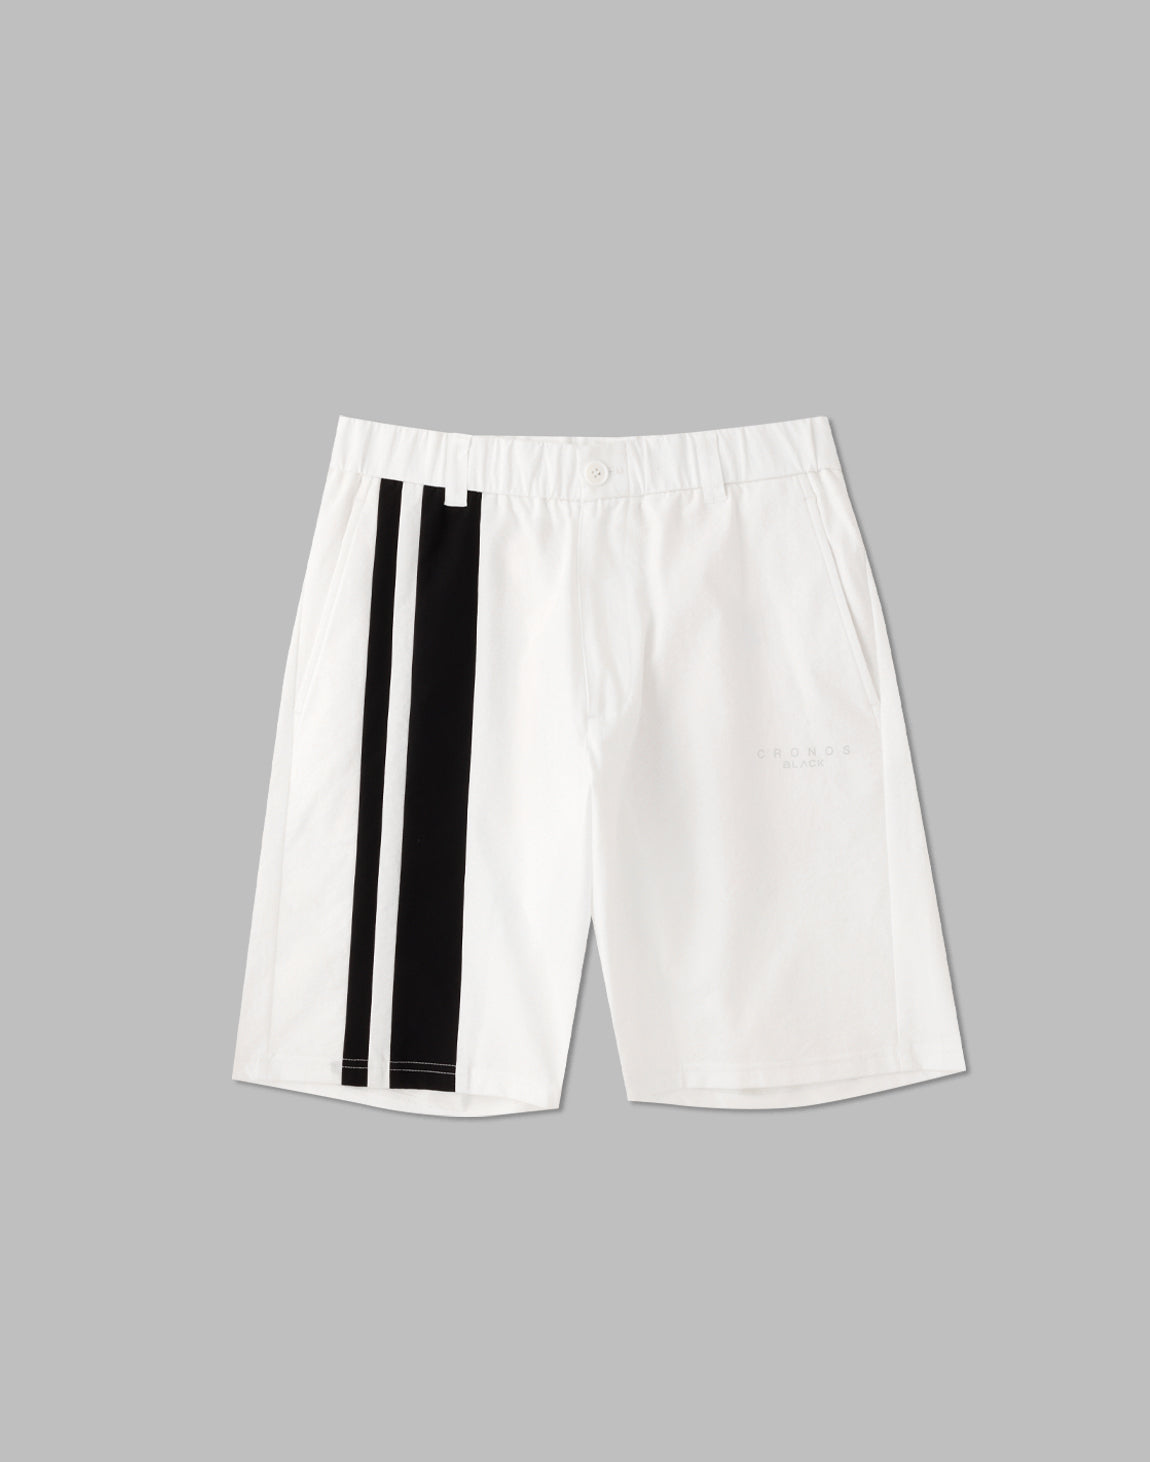 CRONOS BLACK 2LINE SHORTS – クロノス CRONOS Official Store